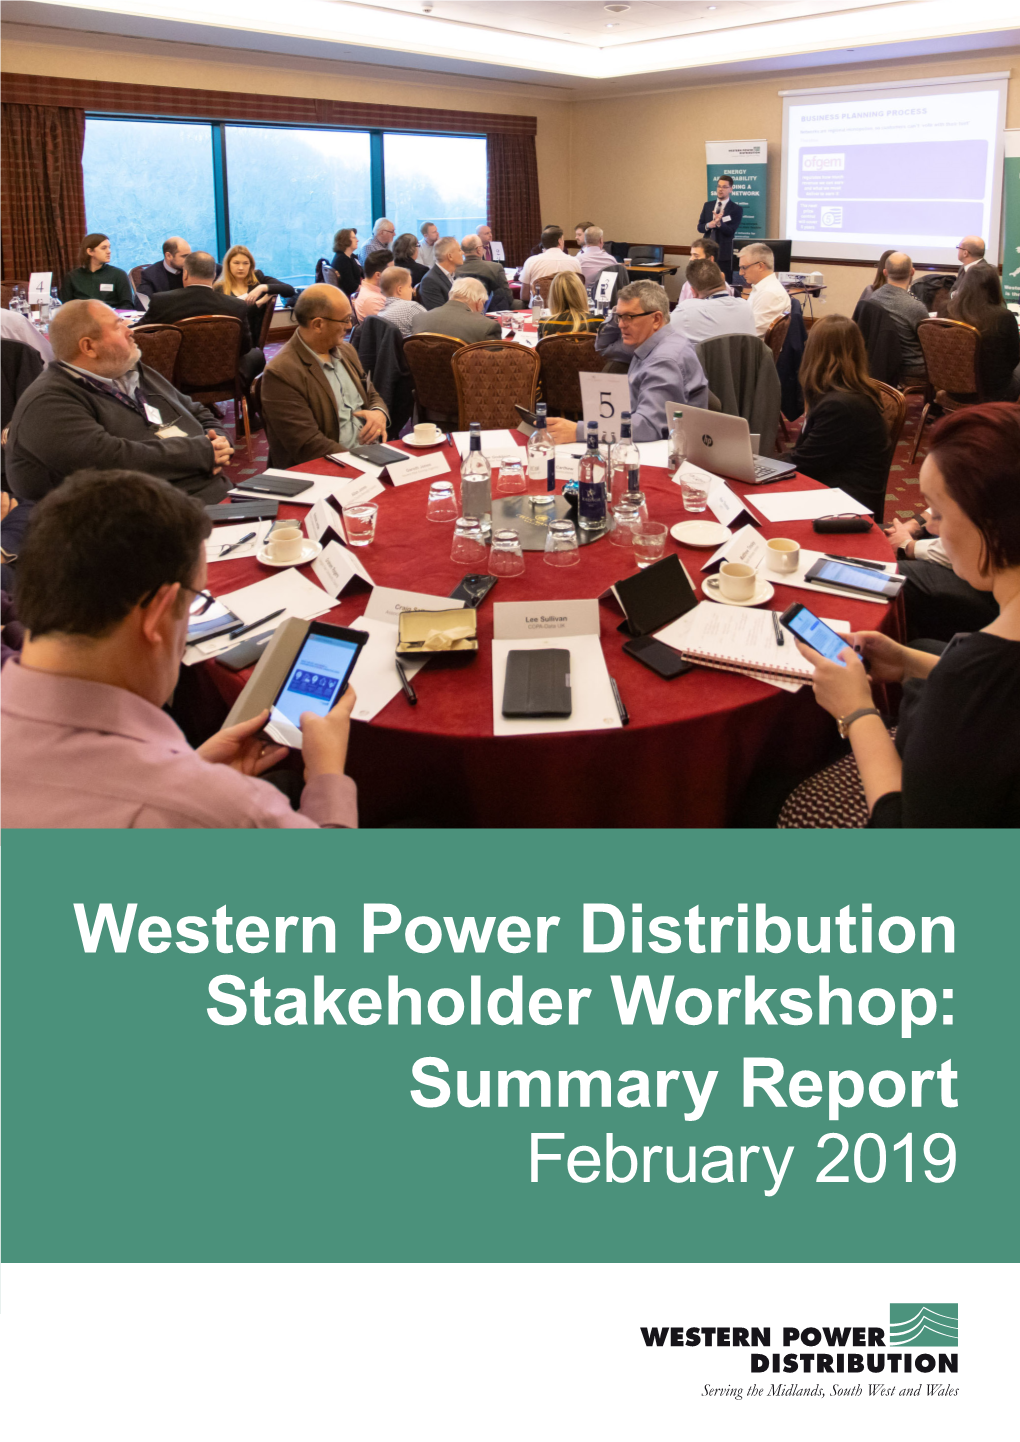 Western Power Distribution Stakeholder Workshop: Summary Report February 2019